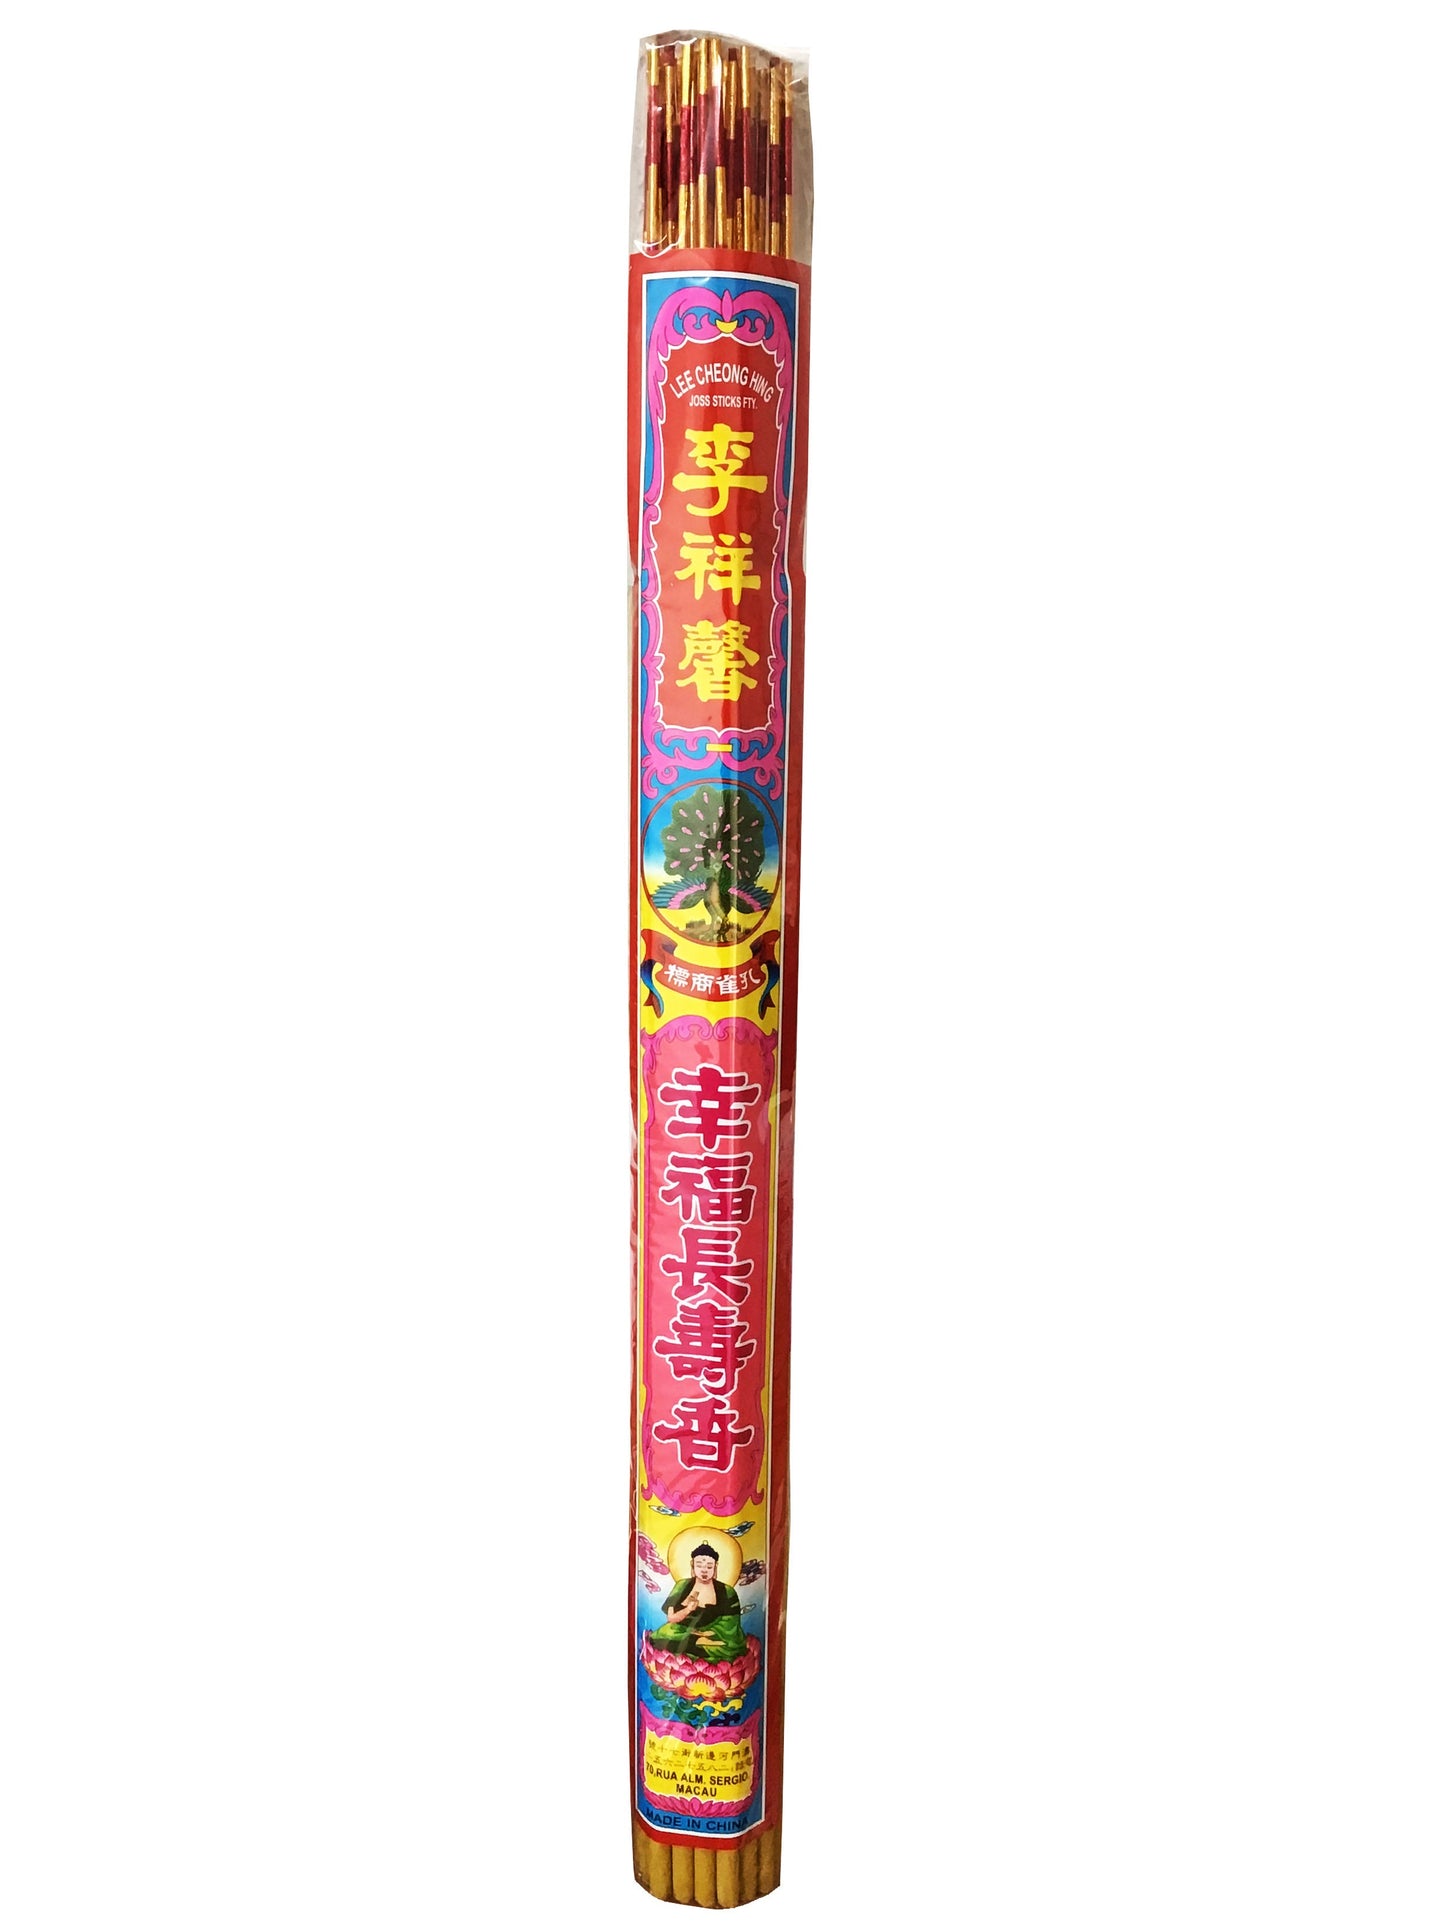 0.6cm Thick Incense Sticks for Wishes Longevity and Happiness - 30 Sticks 李祥馨 幸福长寿香